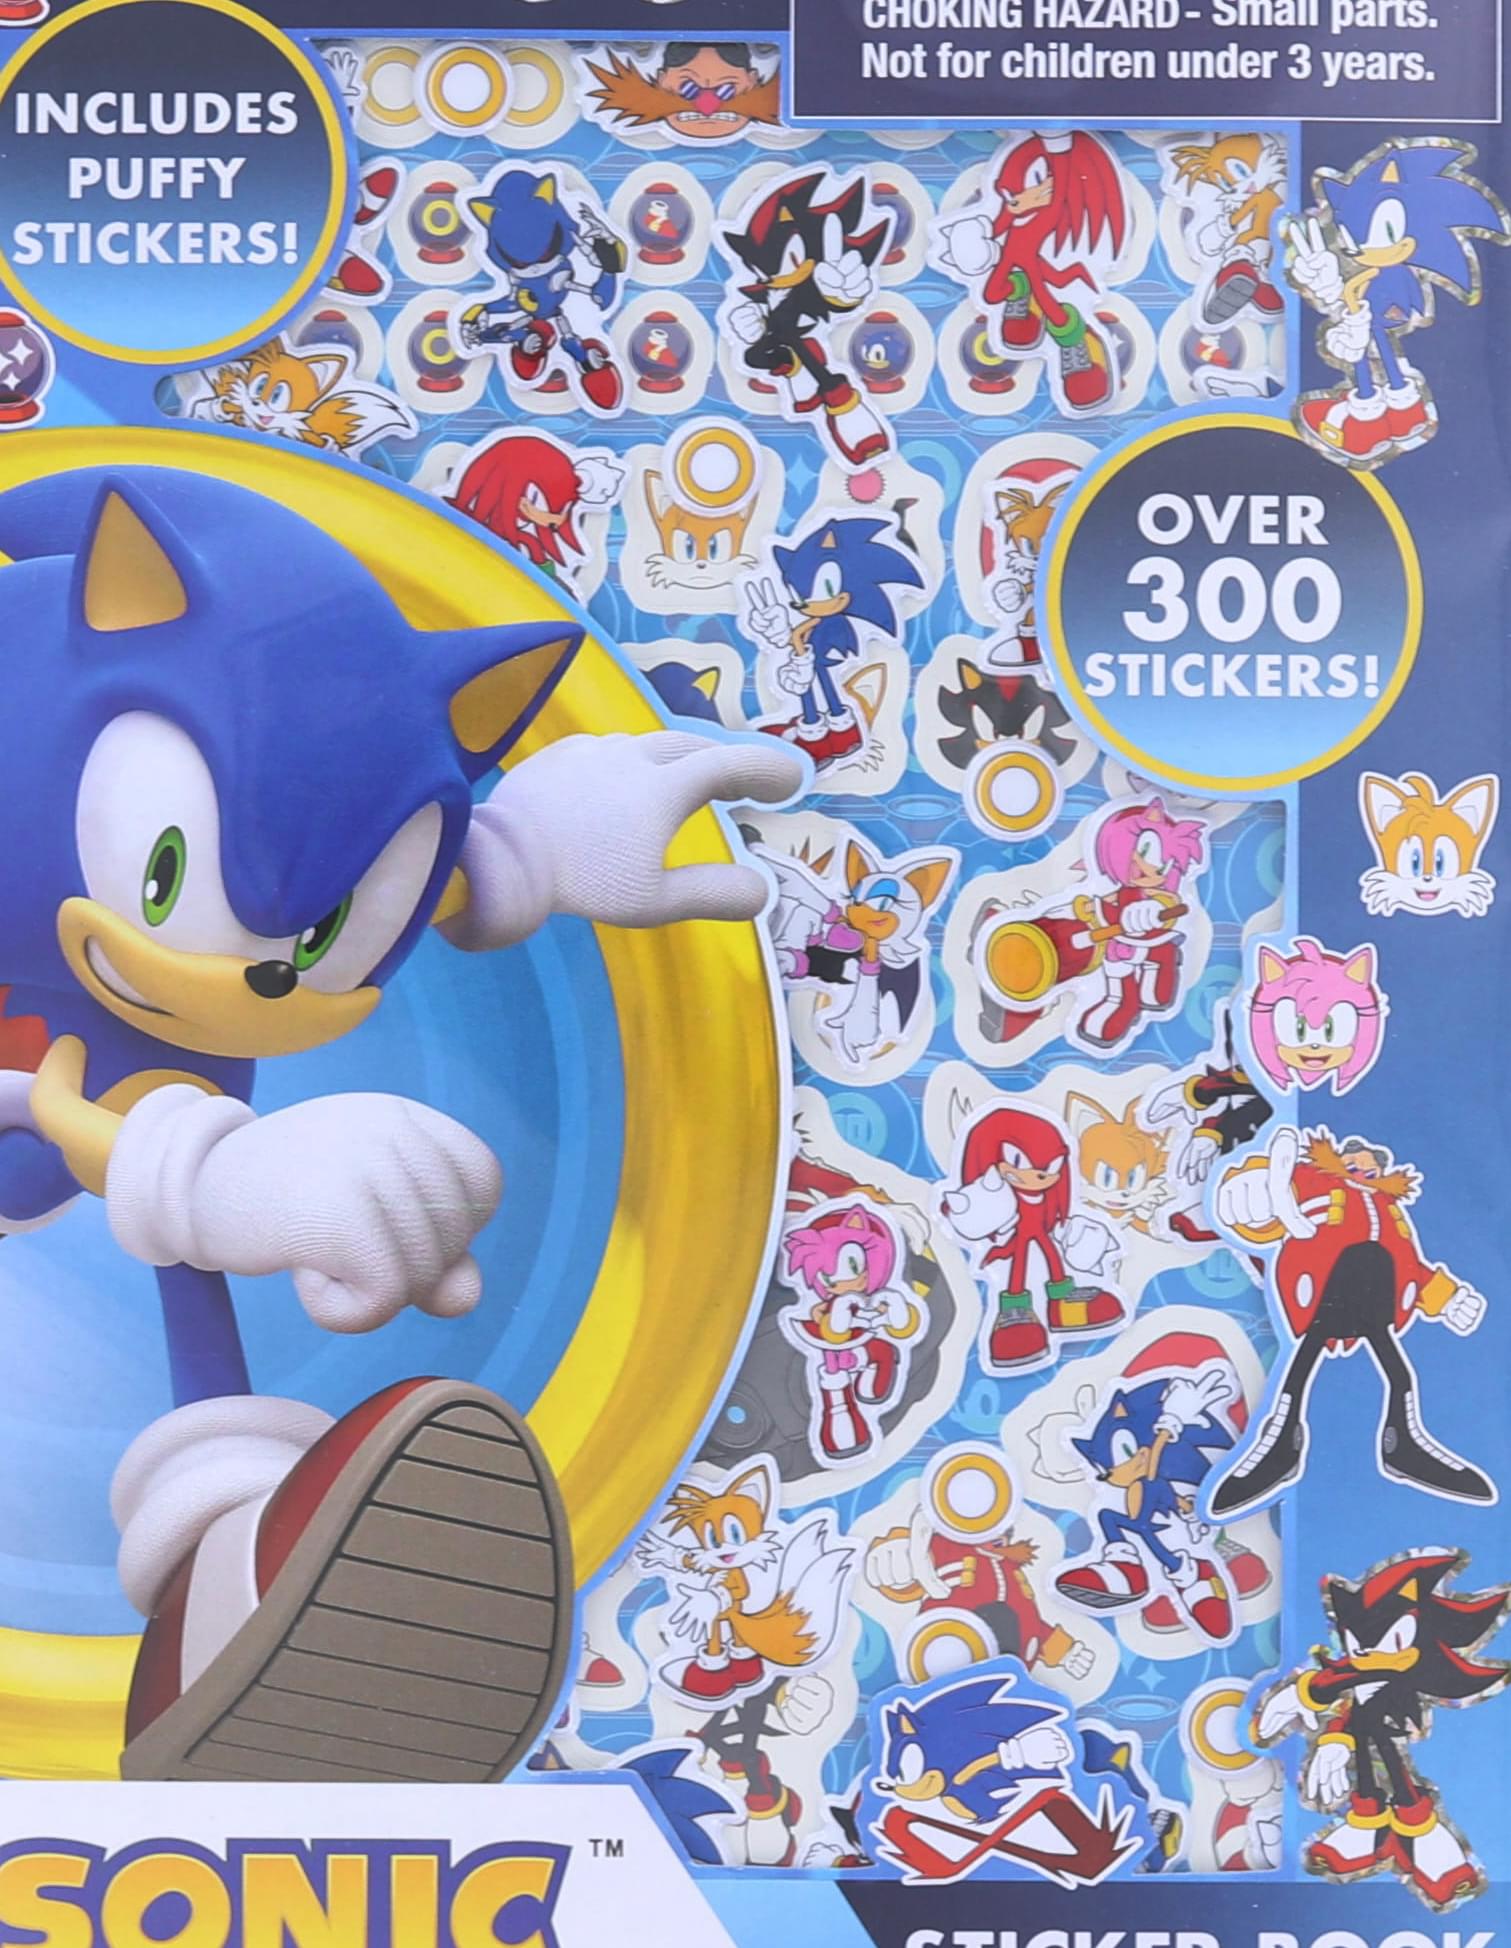 Sonic the Hedgehog Sticker Book | 4 Sheets | Over 300 Stickers